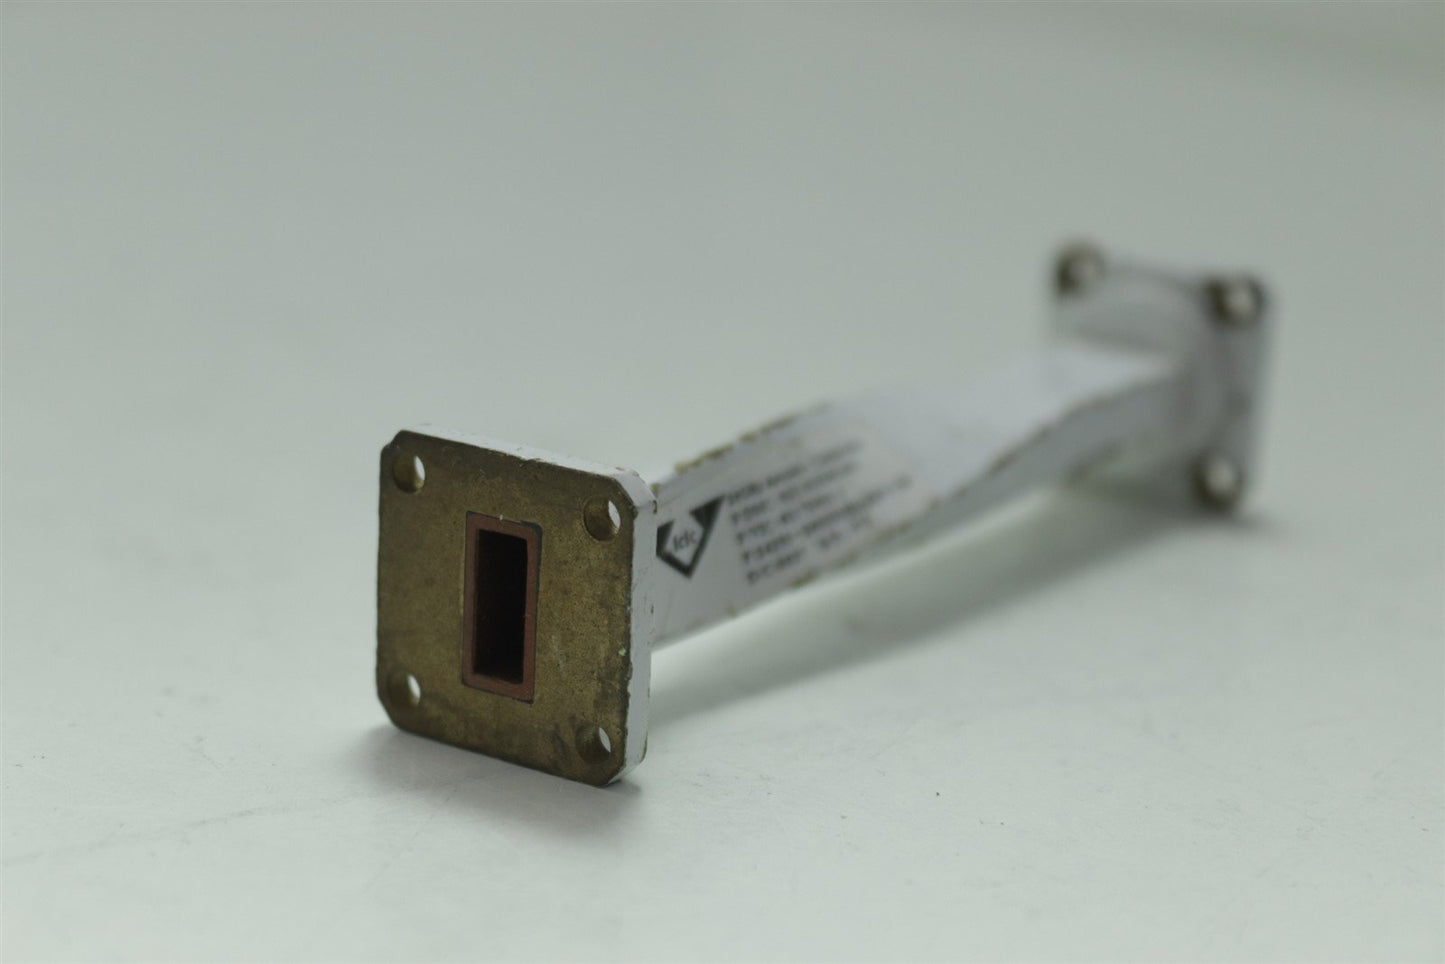 Icic WR-42 Waveguide 3.6 Inch Section, 90 Degree Twist 26GHz